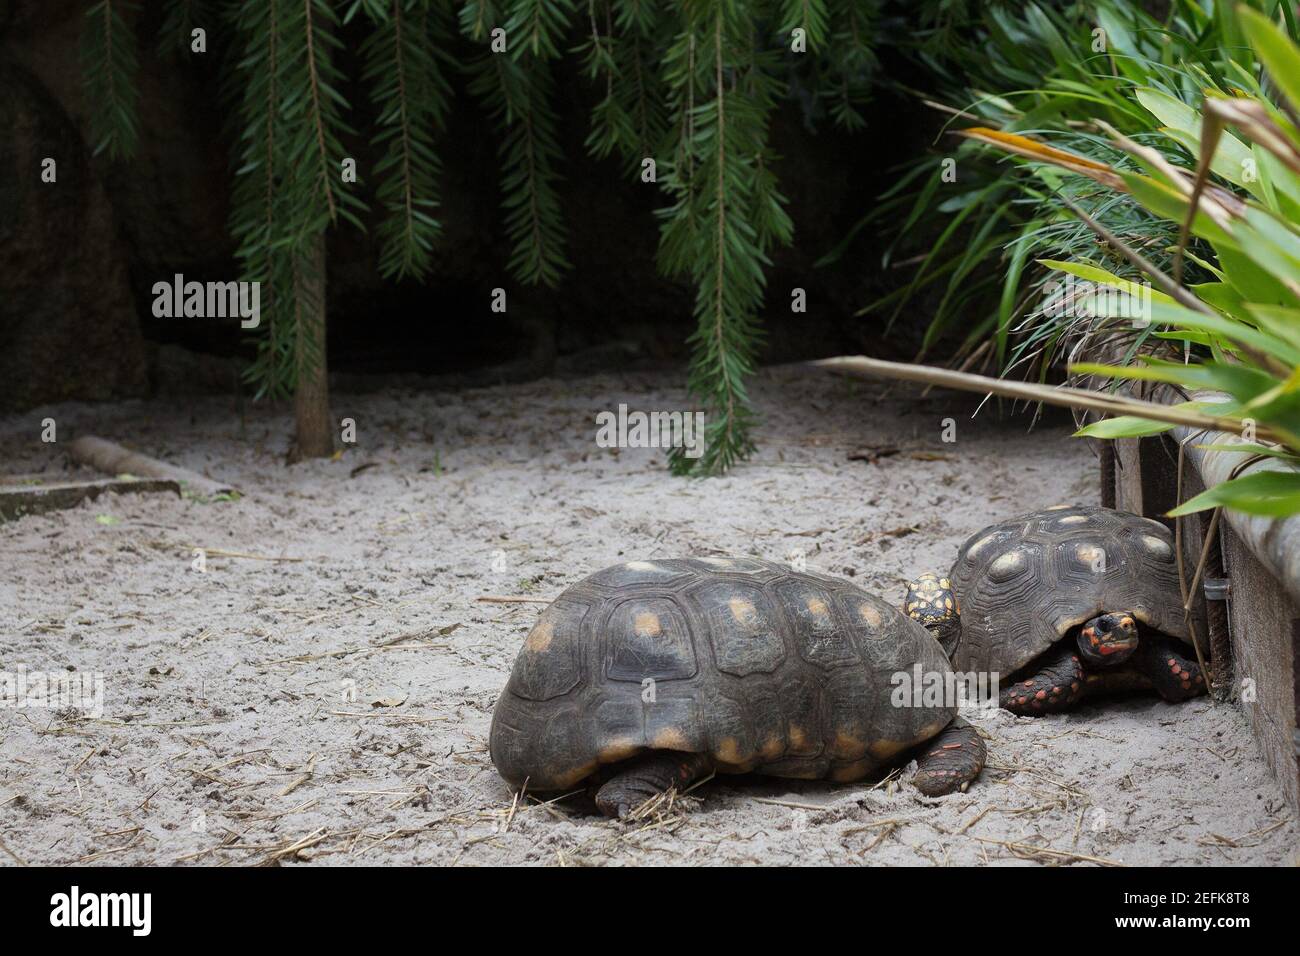 Two captive tortoises in an outdoor enclosure. Stock Photo